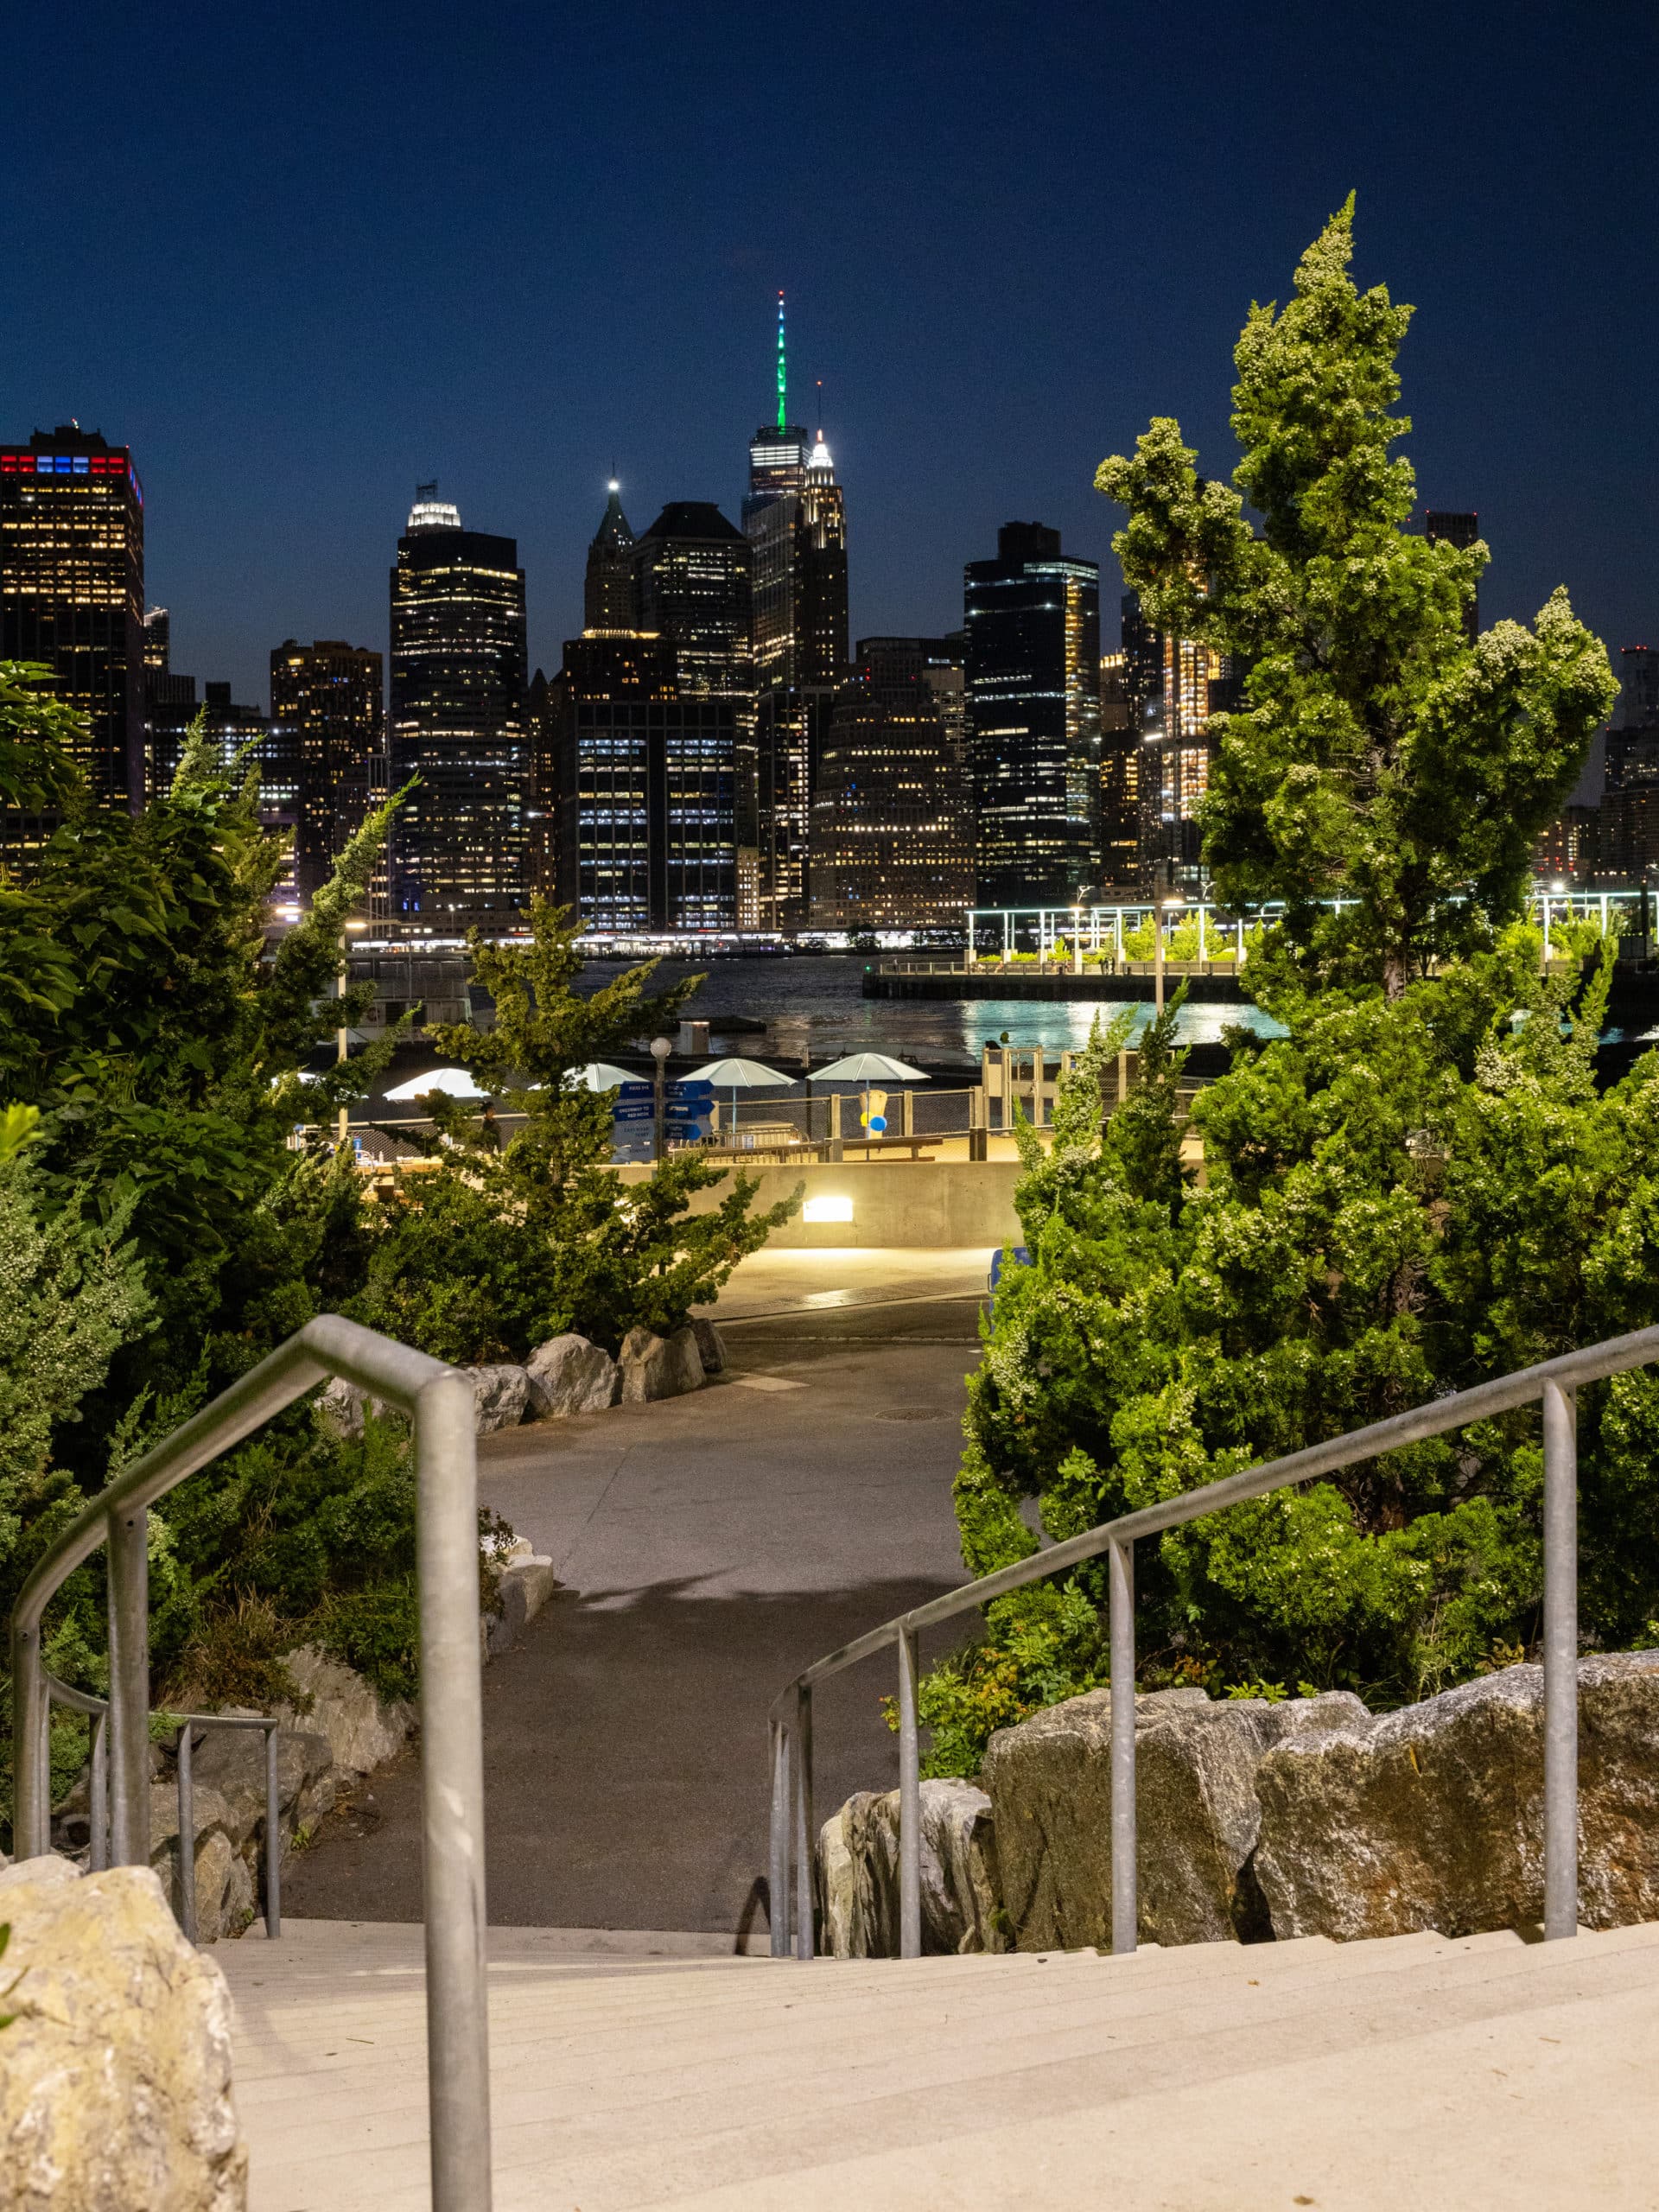 Stairs to path in Pier 5 Uplands at night with view of lower Manhattan.